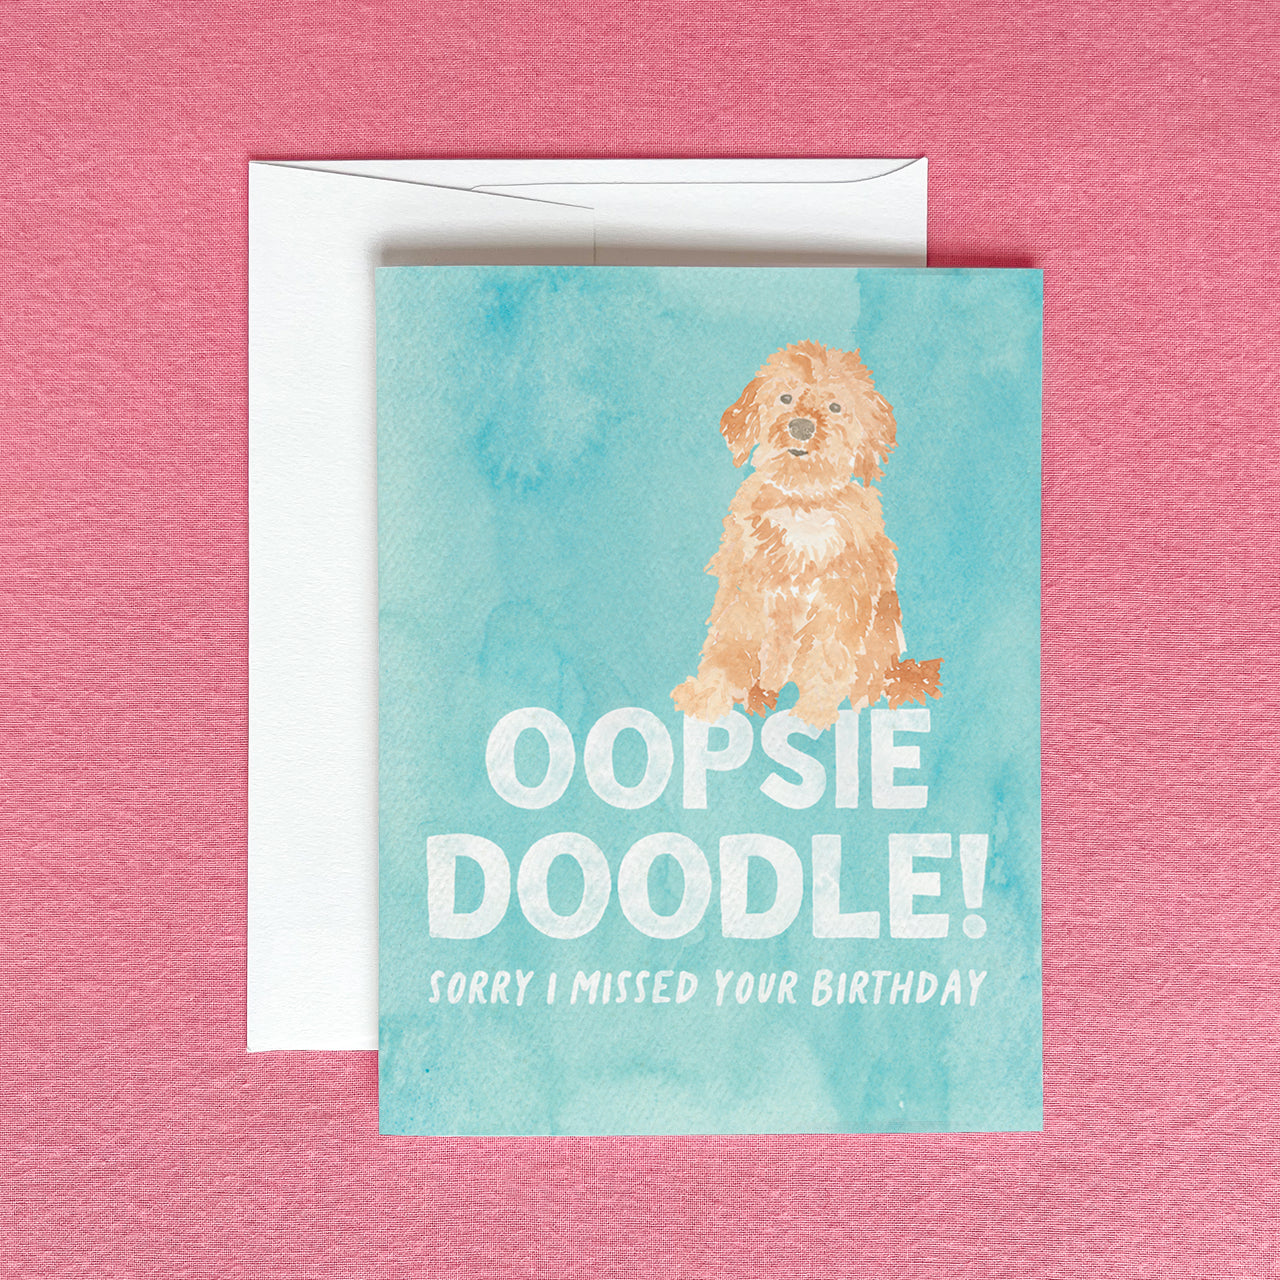 Goldendoodle Belated Birthday Greeting Card by Gert & Co